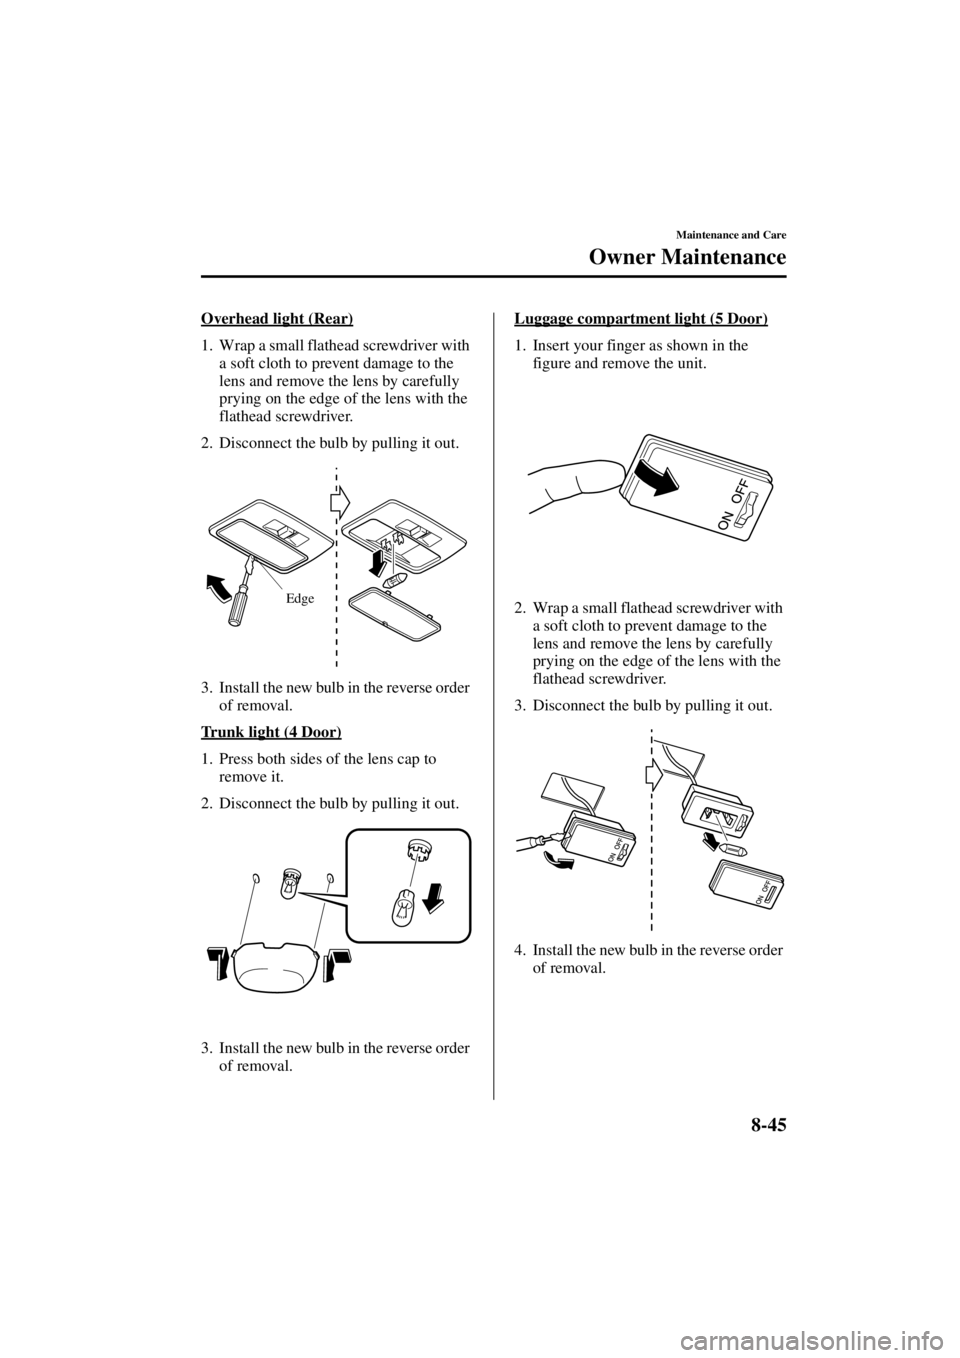 MAZDA MODEL 3 4-DOOR 2004  Owners Manual 8-45
Maintenance and Care
Owner Maintenance
Form No. 8S18-EA-03I
Overhead light (Rear)
1. Wrap a small flathead screwdriver with a soft cloth to prevent damage to the 
lens and remove the lens by care